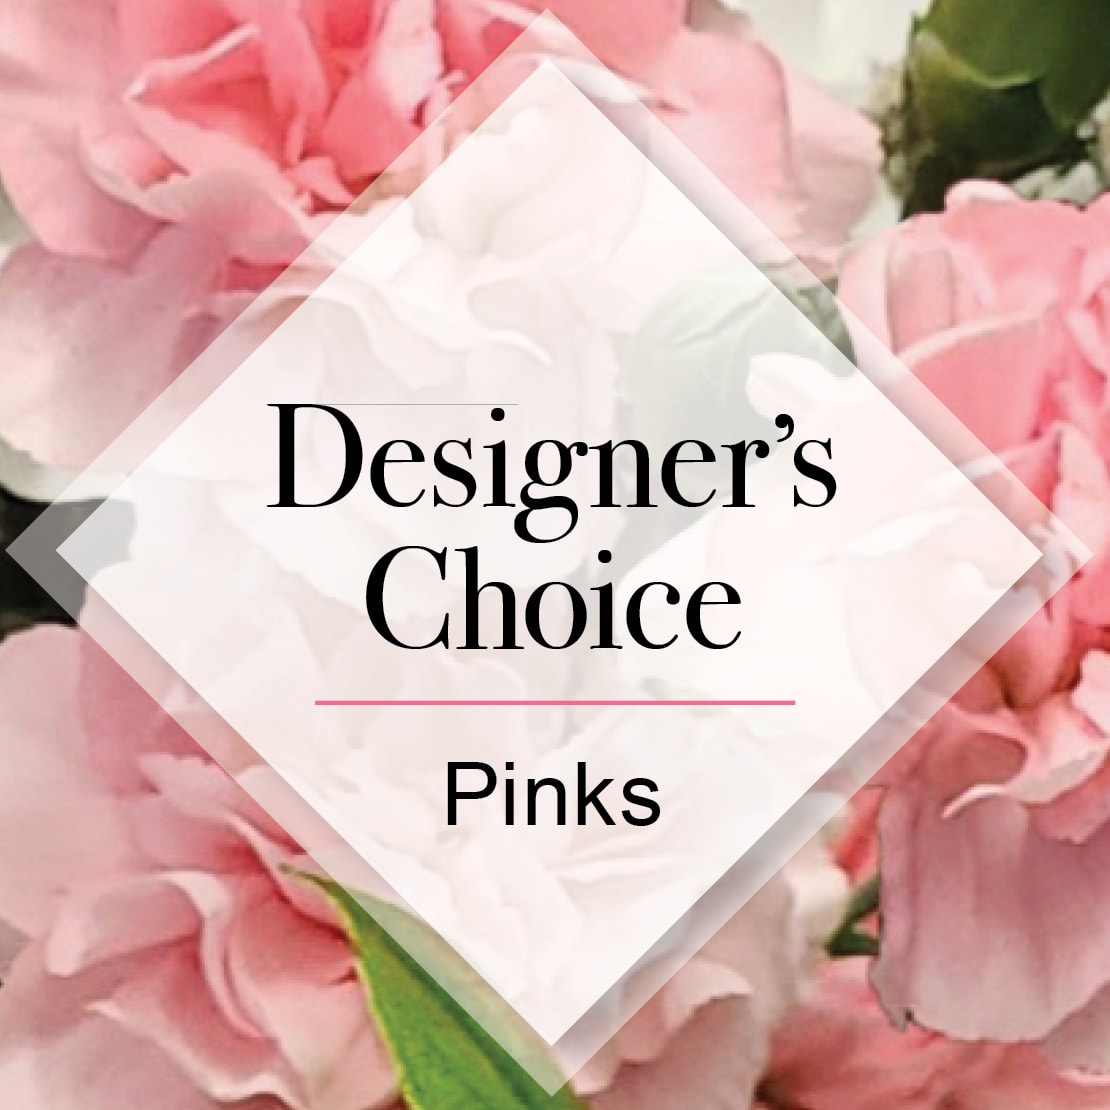 Designers Choice Pink - A selection that will be predominately the color that you have chosen with accents and greenery to compliment. The designers have the flexibility to create something unique and beautiful for you and is often the best value for you. If you have specifics you would like to request please include in the comments / special instructions area when placing your order.